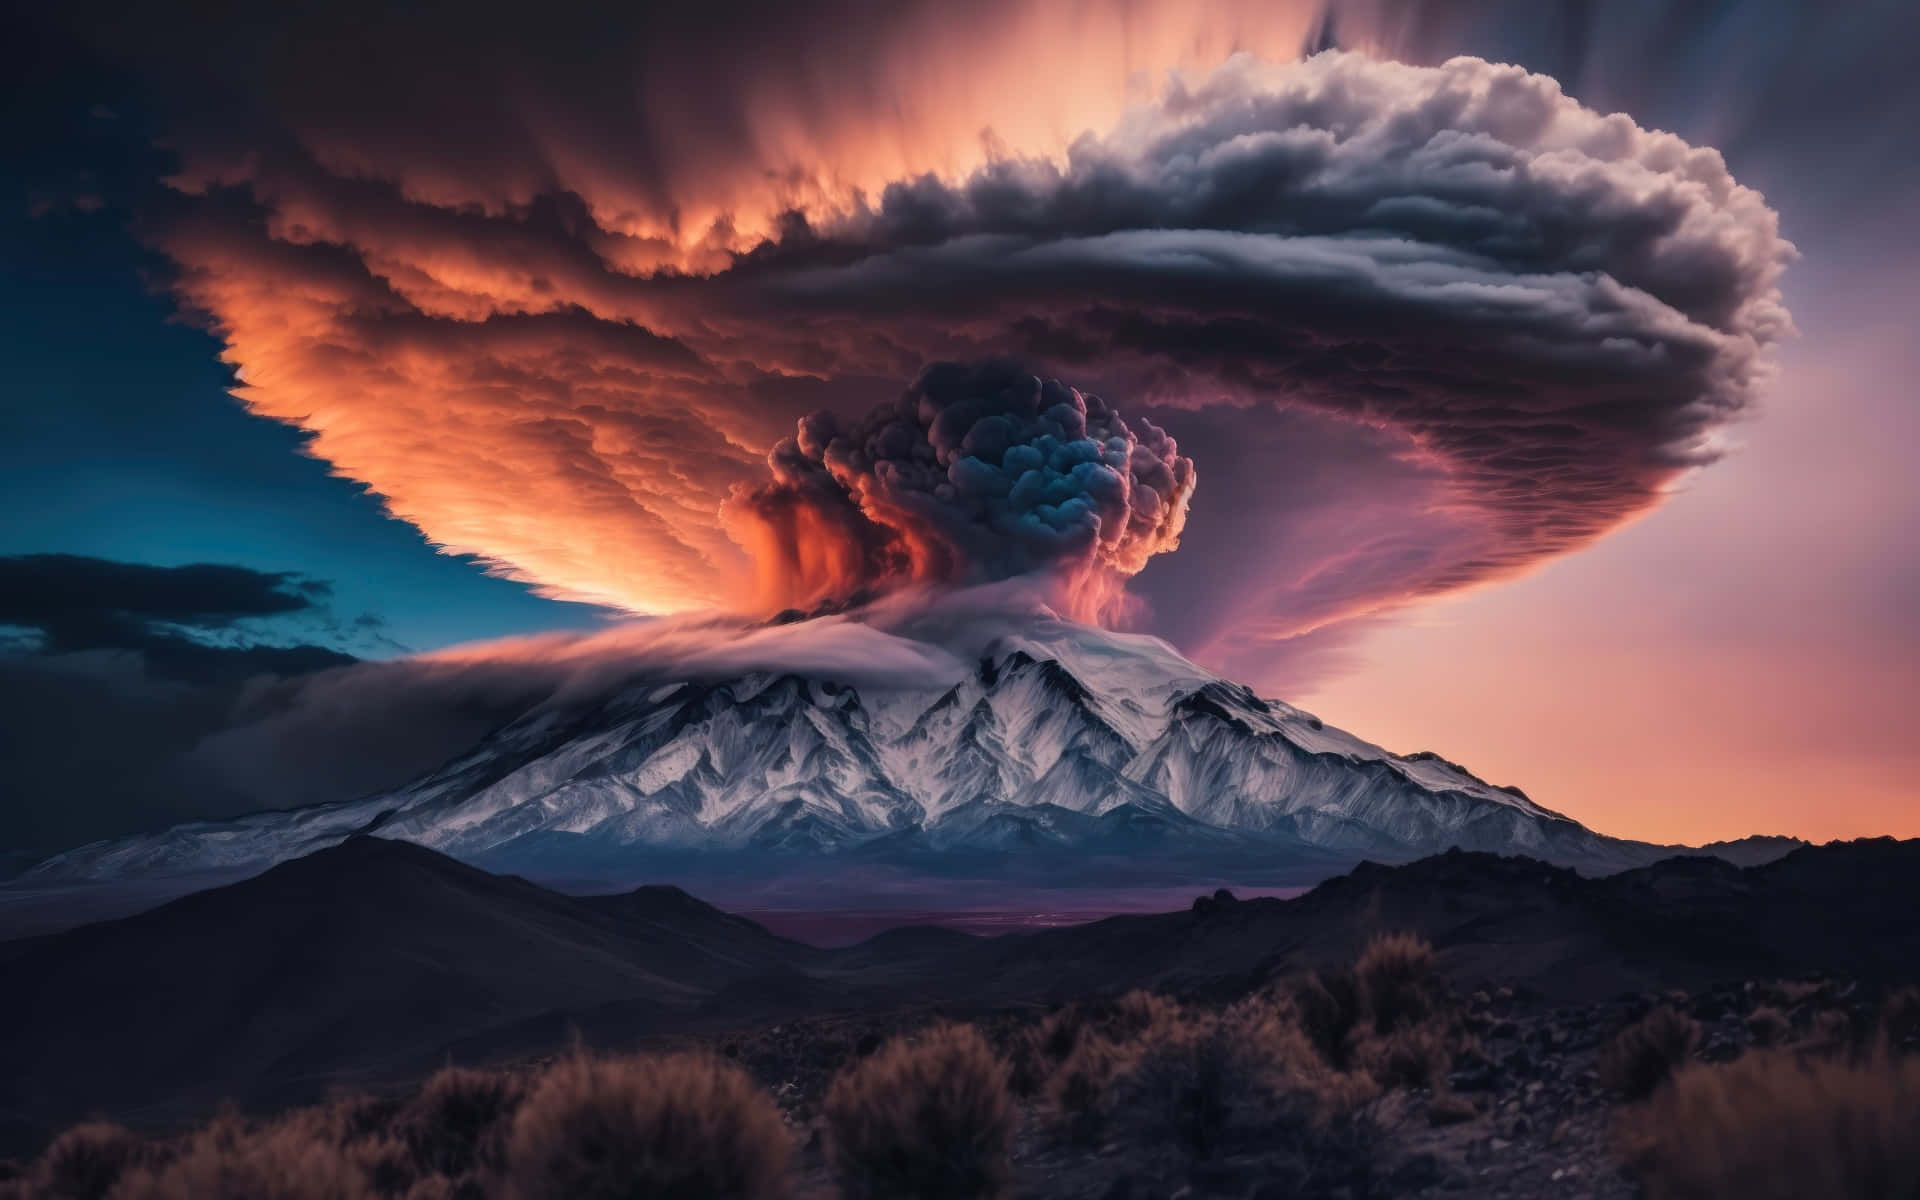 An isolated view of a powerful and majestic volcano